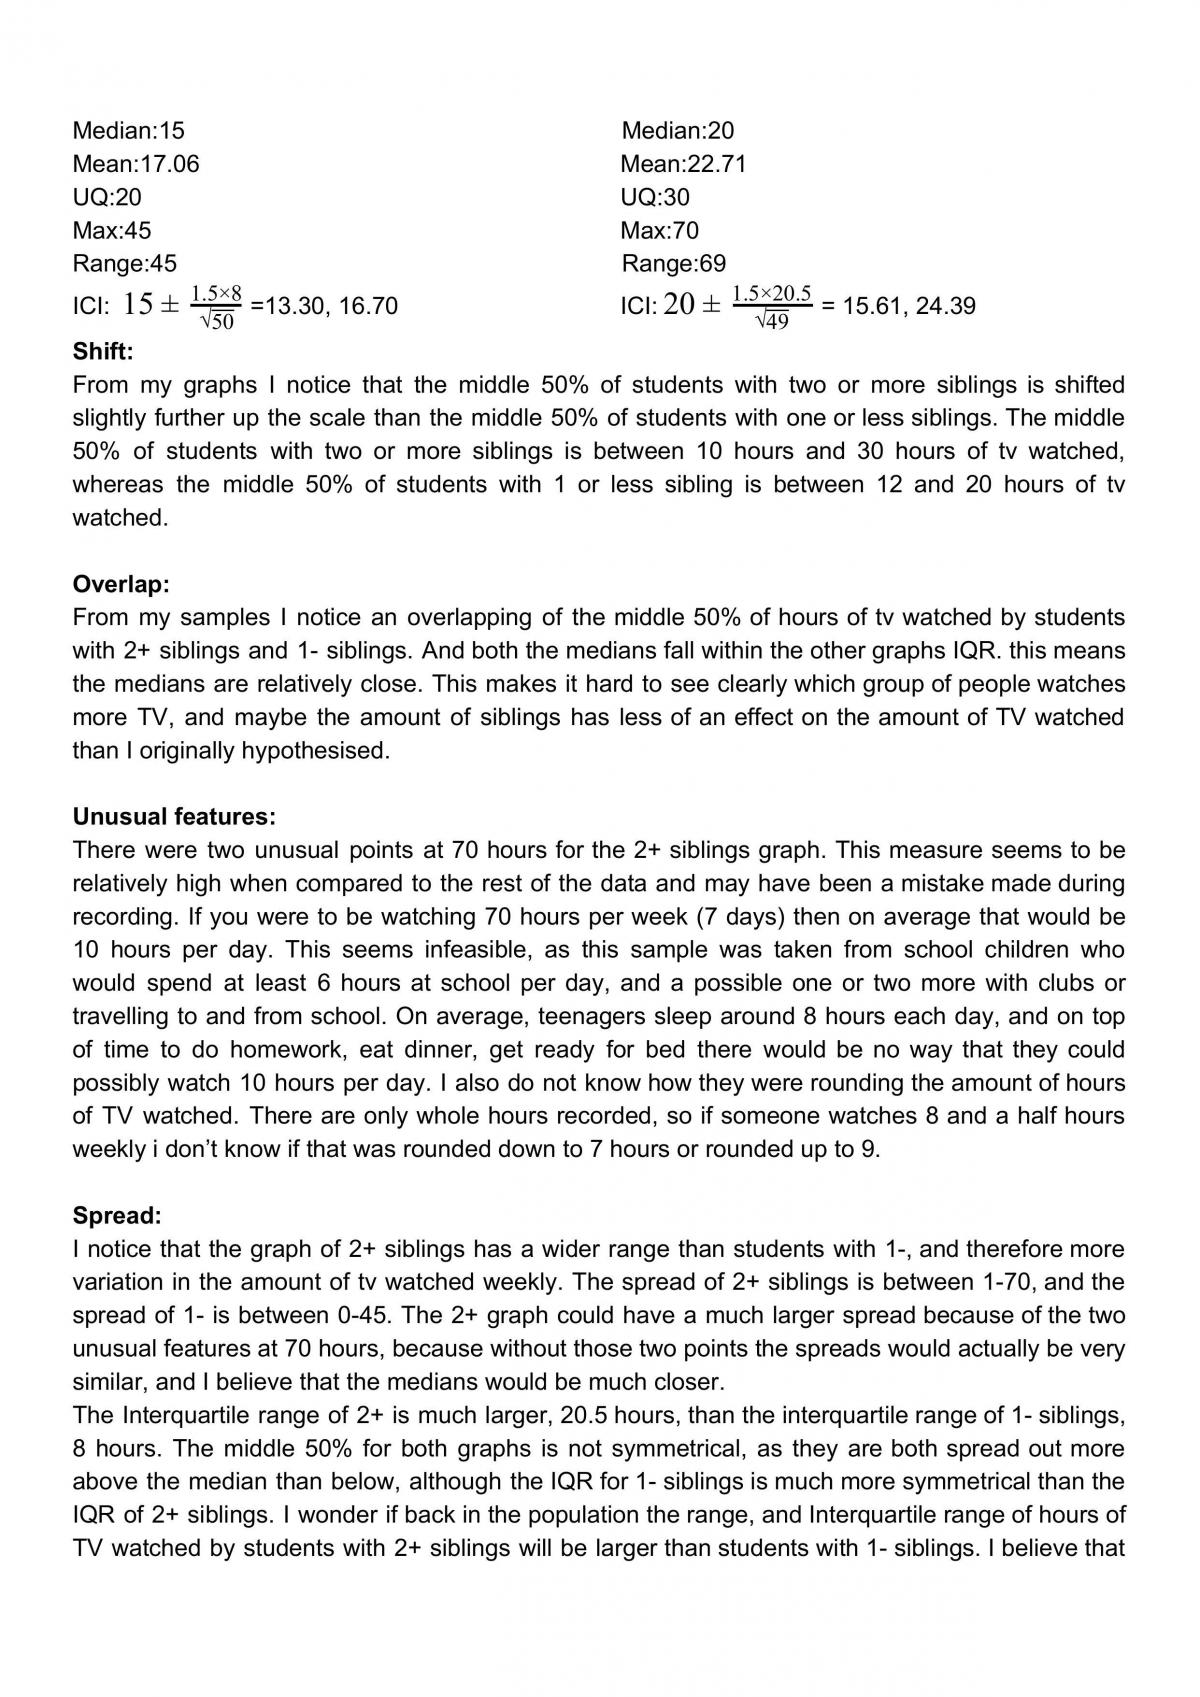 Mayfield Statistical Investigation - Page 2